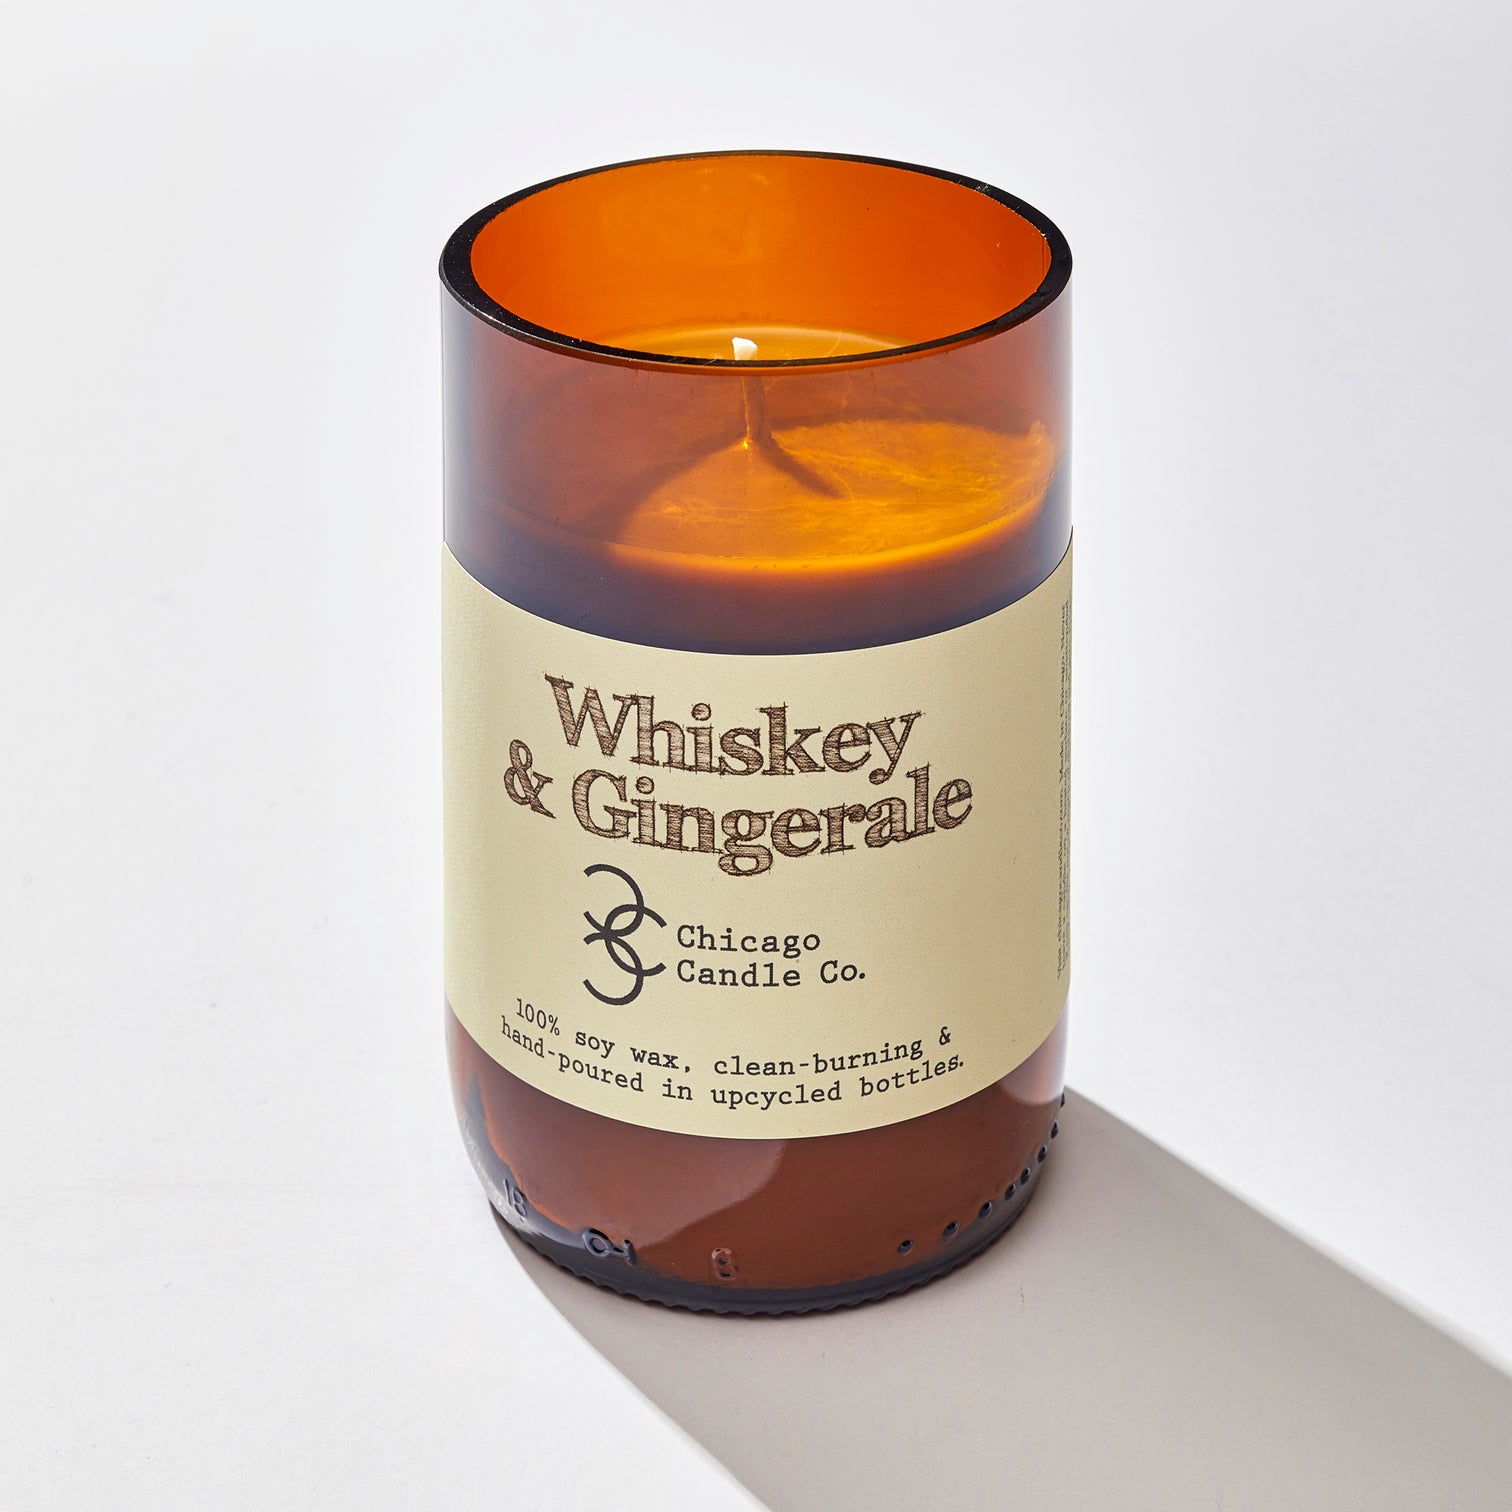 Whiskey & Gingerale – Chicago Candle Co.